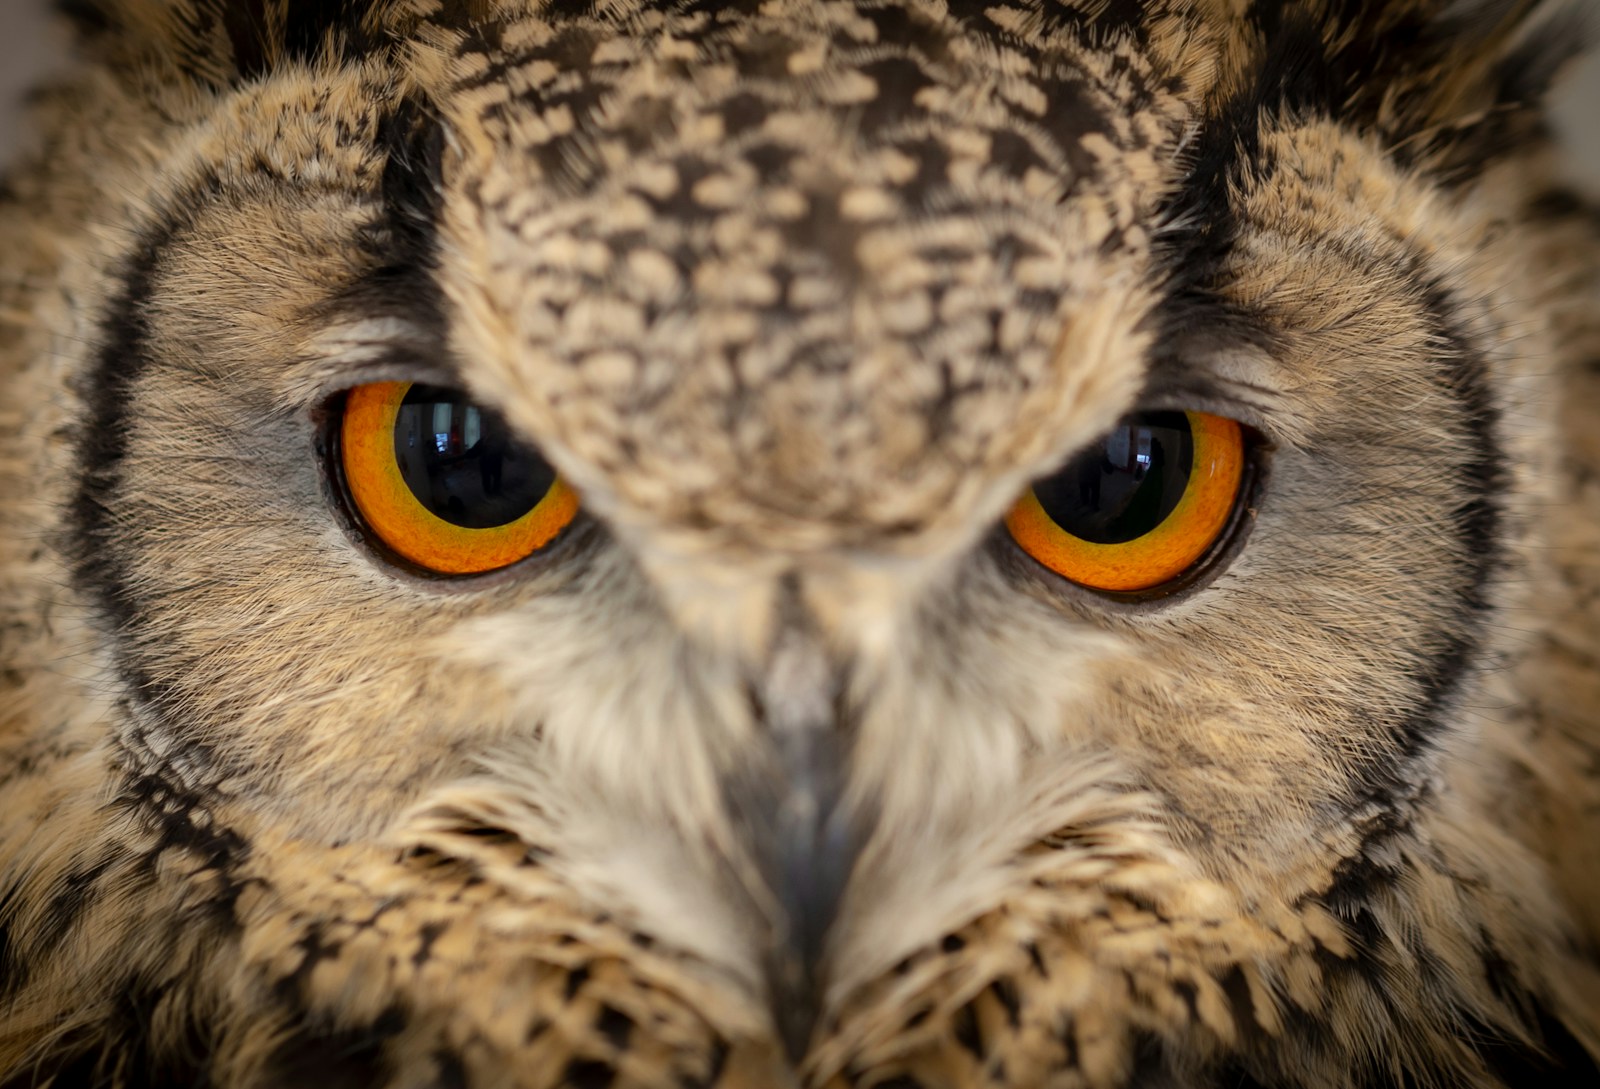 a close up of an owl with orange eyes